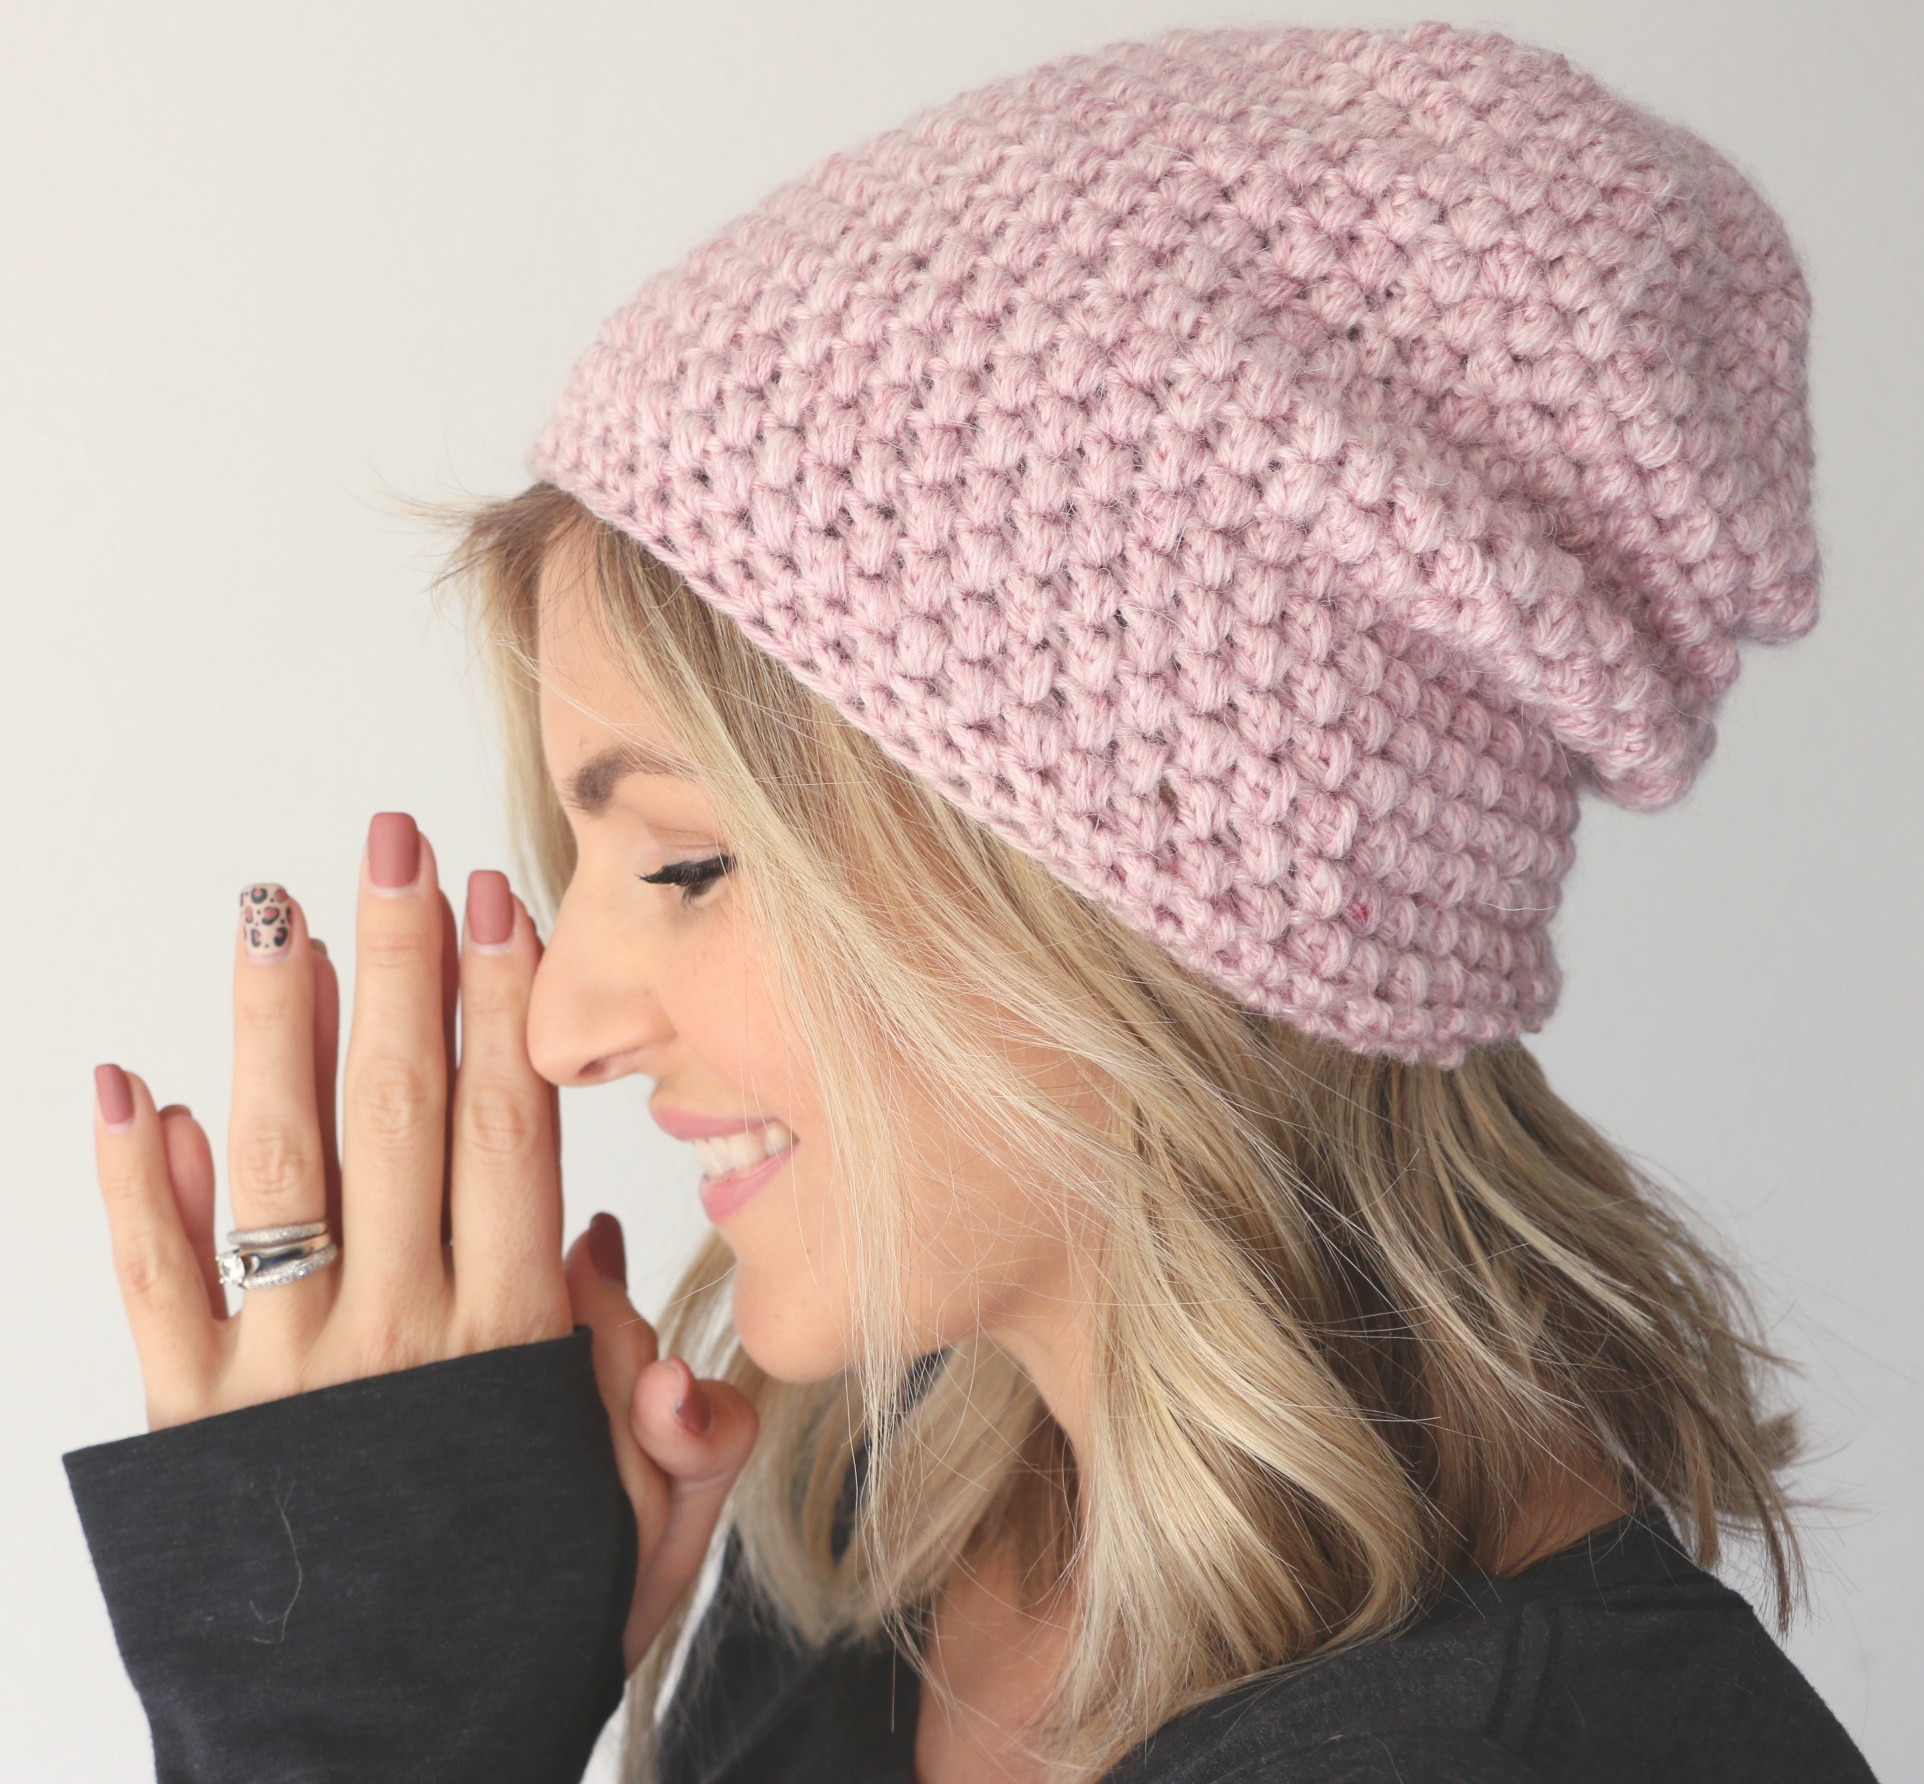 Free Slouchy Crochet Hat Pattern with Video tutorial and instructions